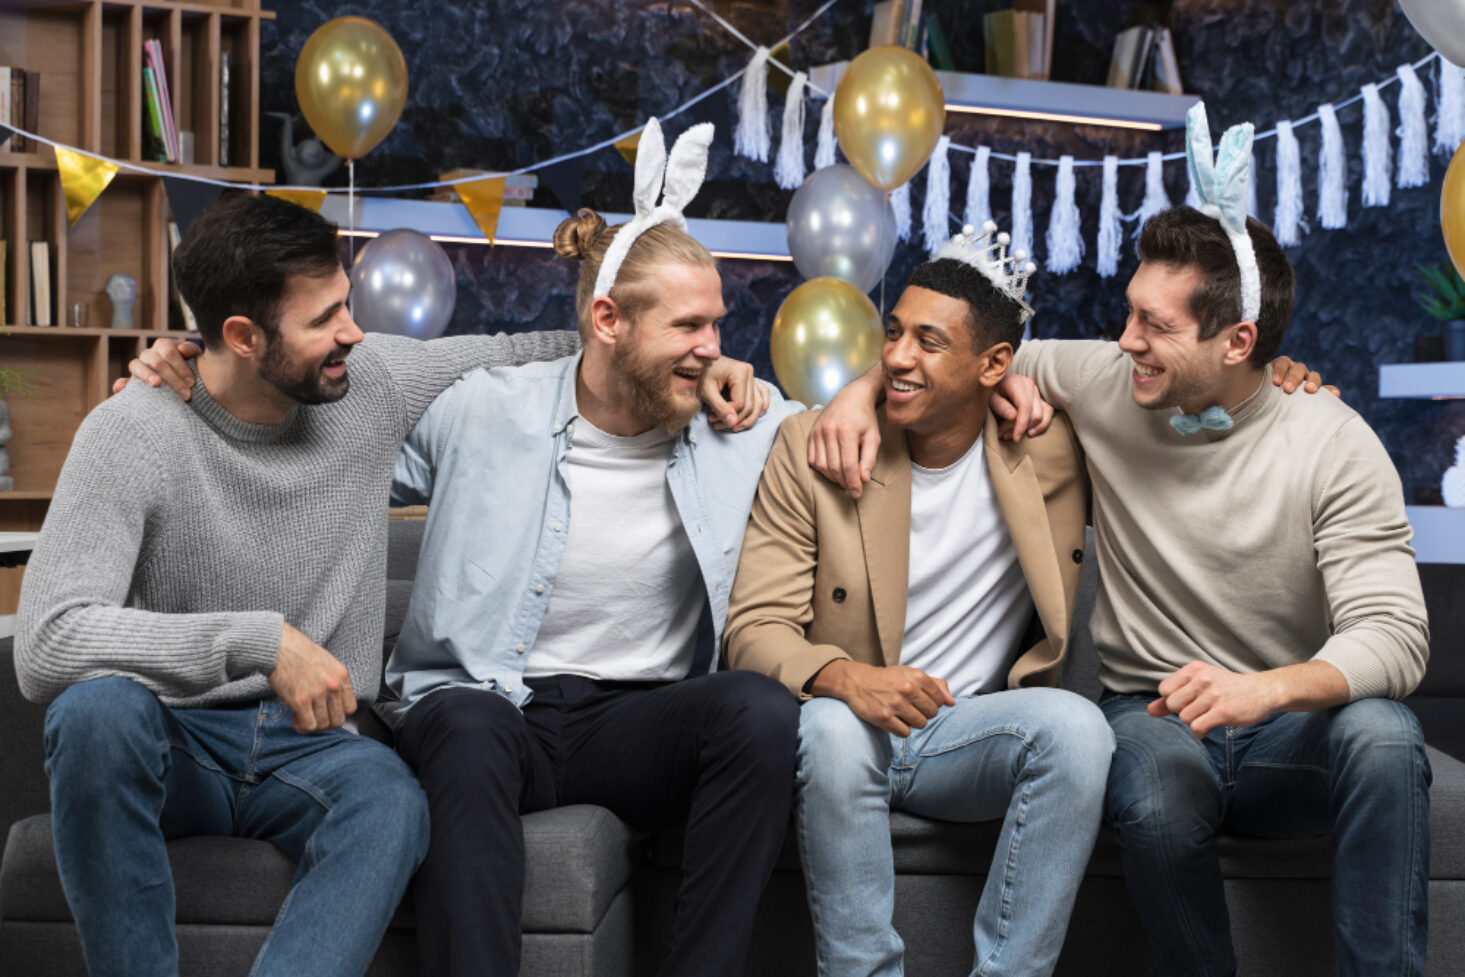 How to Plan a Stag Do That Everyone Will Enjoy